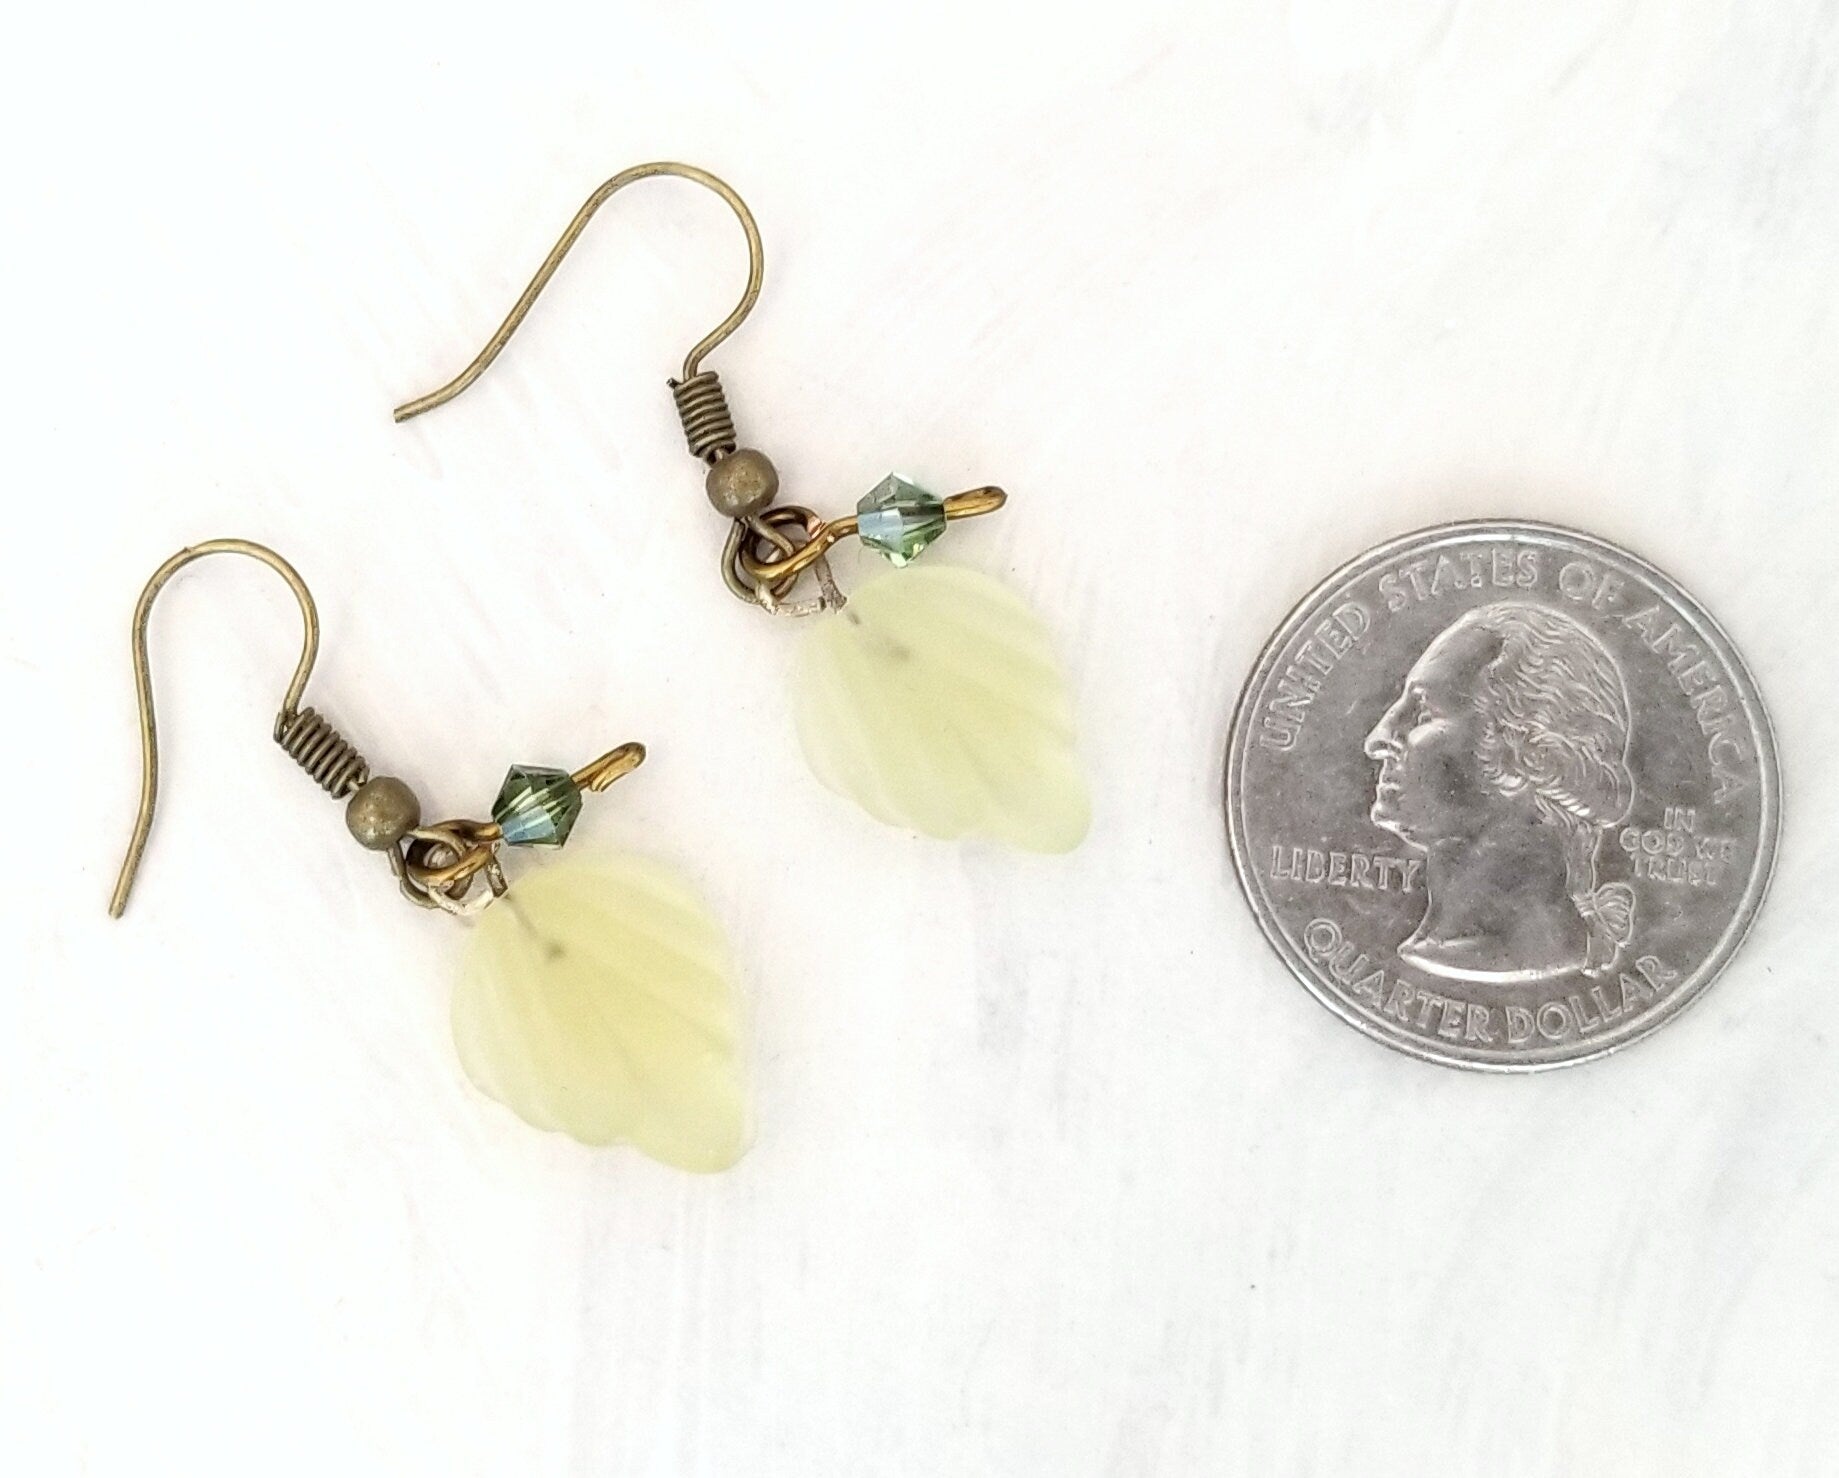 Small Glass Leaf Earrings in Frosted Light Greenish Yellow, Wedding, Bridesmaid, Art Nouveau, Renaissance, Forest, Choice of Closure Types